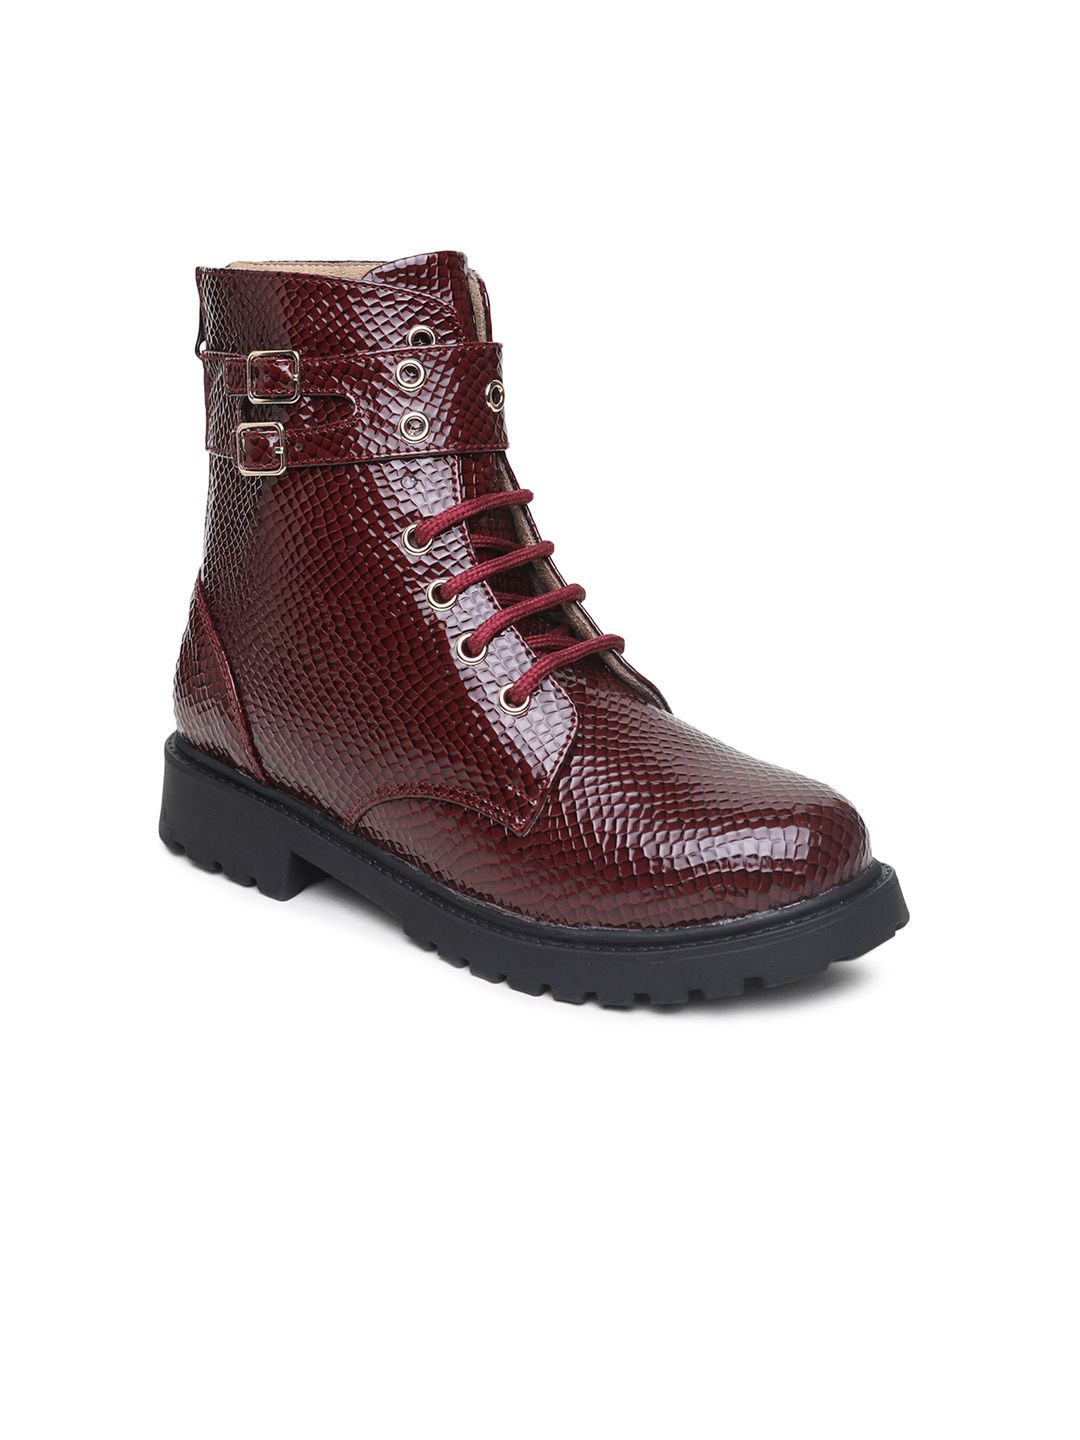 VALIOSAA Maroon Textured High-Top Wedge Heeled Boots with Buckles Price in India